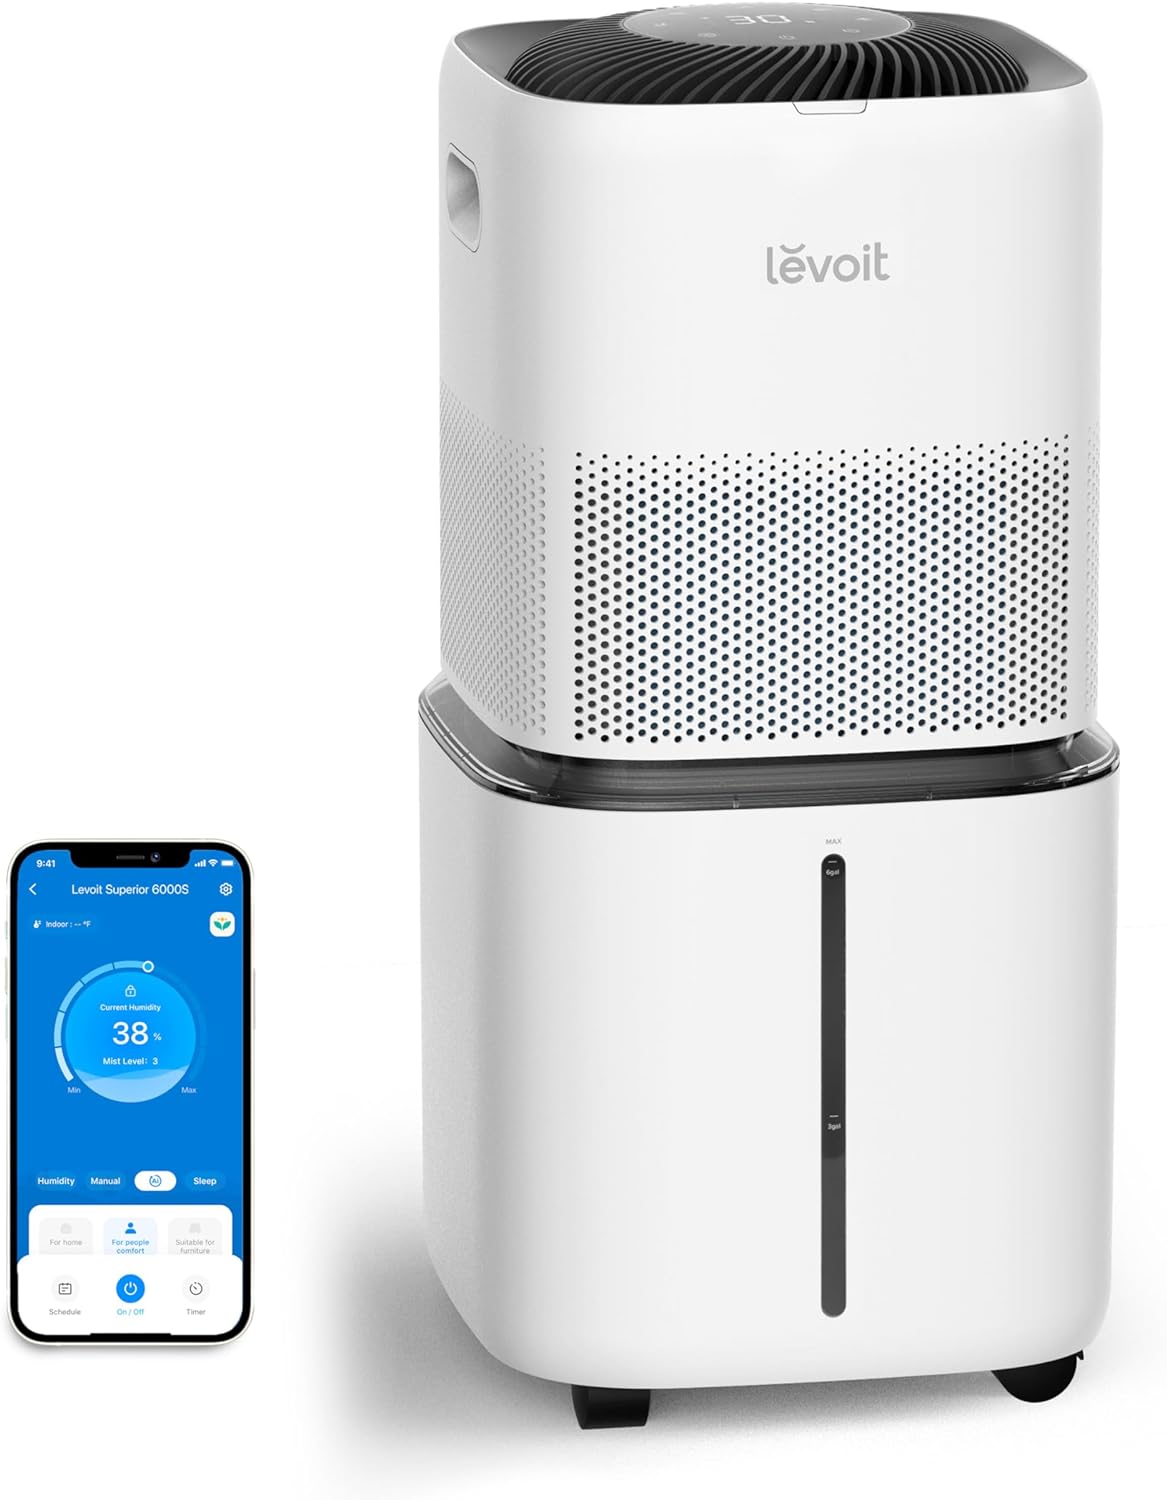 LEVOIT Superior 6000S Smart Evaporative Humidifiers for Home Whole House up to 3000ft, 6 Gal, Last 72-Hour, Premium Filter, Dry Mode, Wheels & Water Fill Hose & Foldable Storage - Quiet Sleep Mode